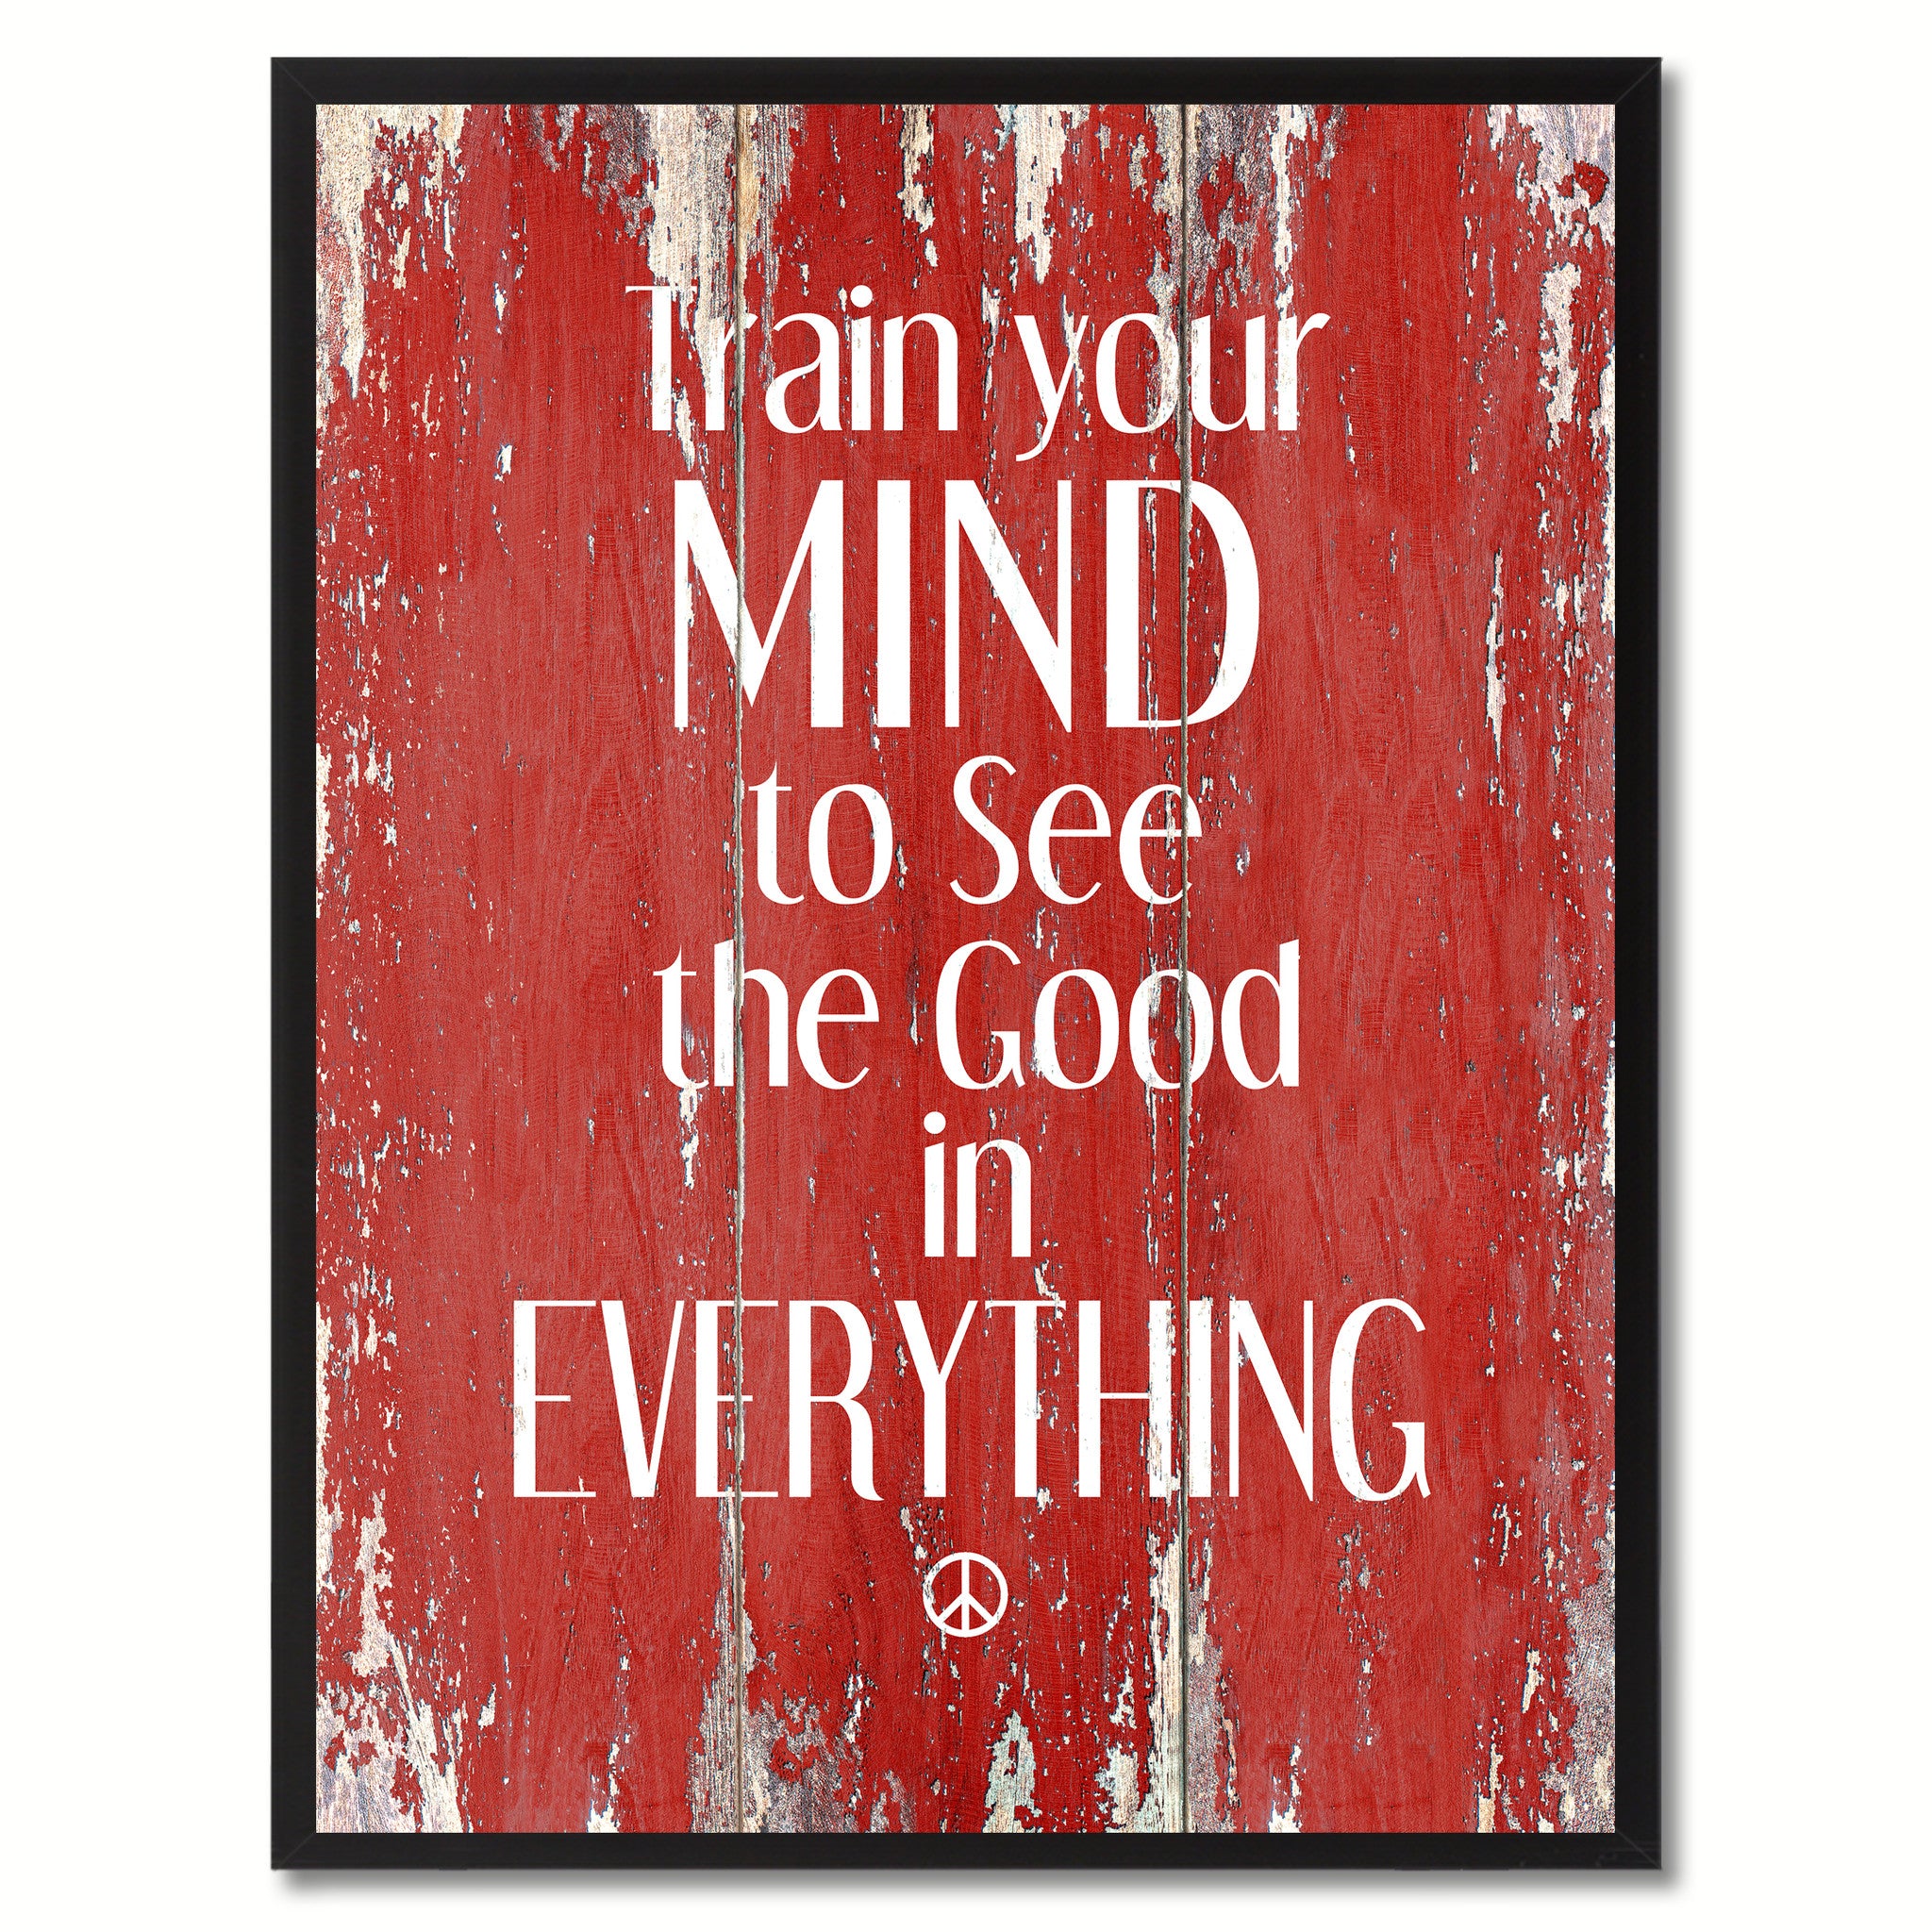 Train your mind to see the good in everything Motivational Quote Saying Canvas Print with Picture Frame Home Decor Wall Art, Red